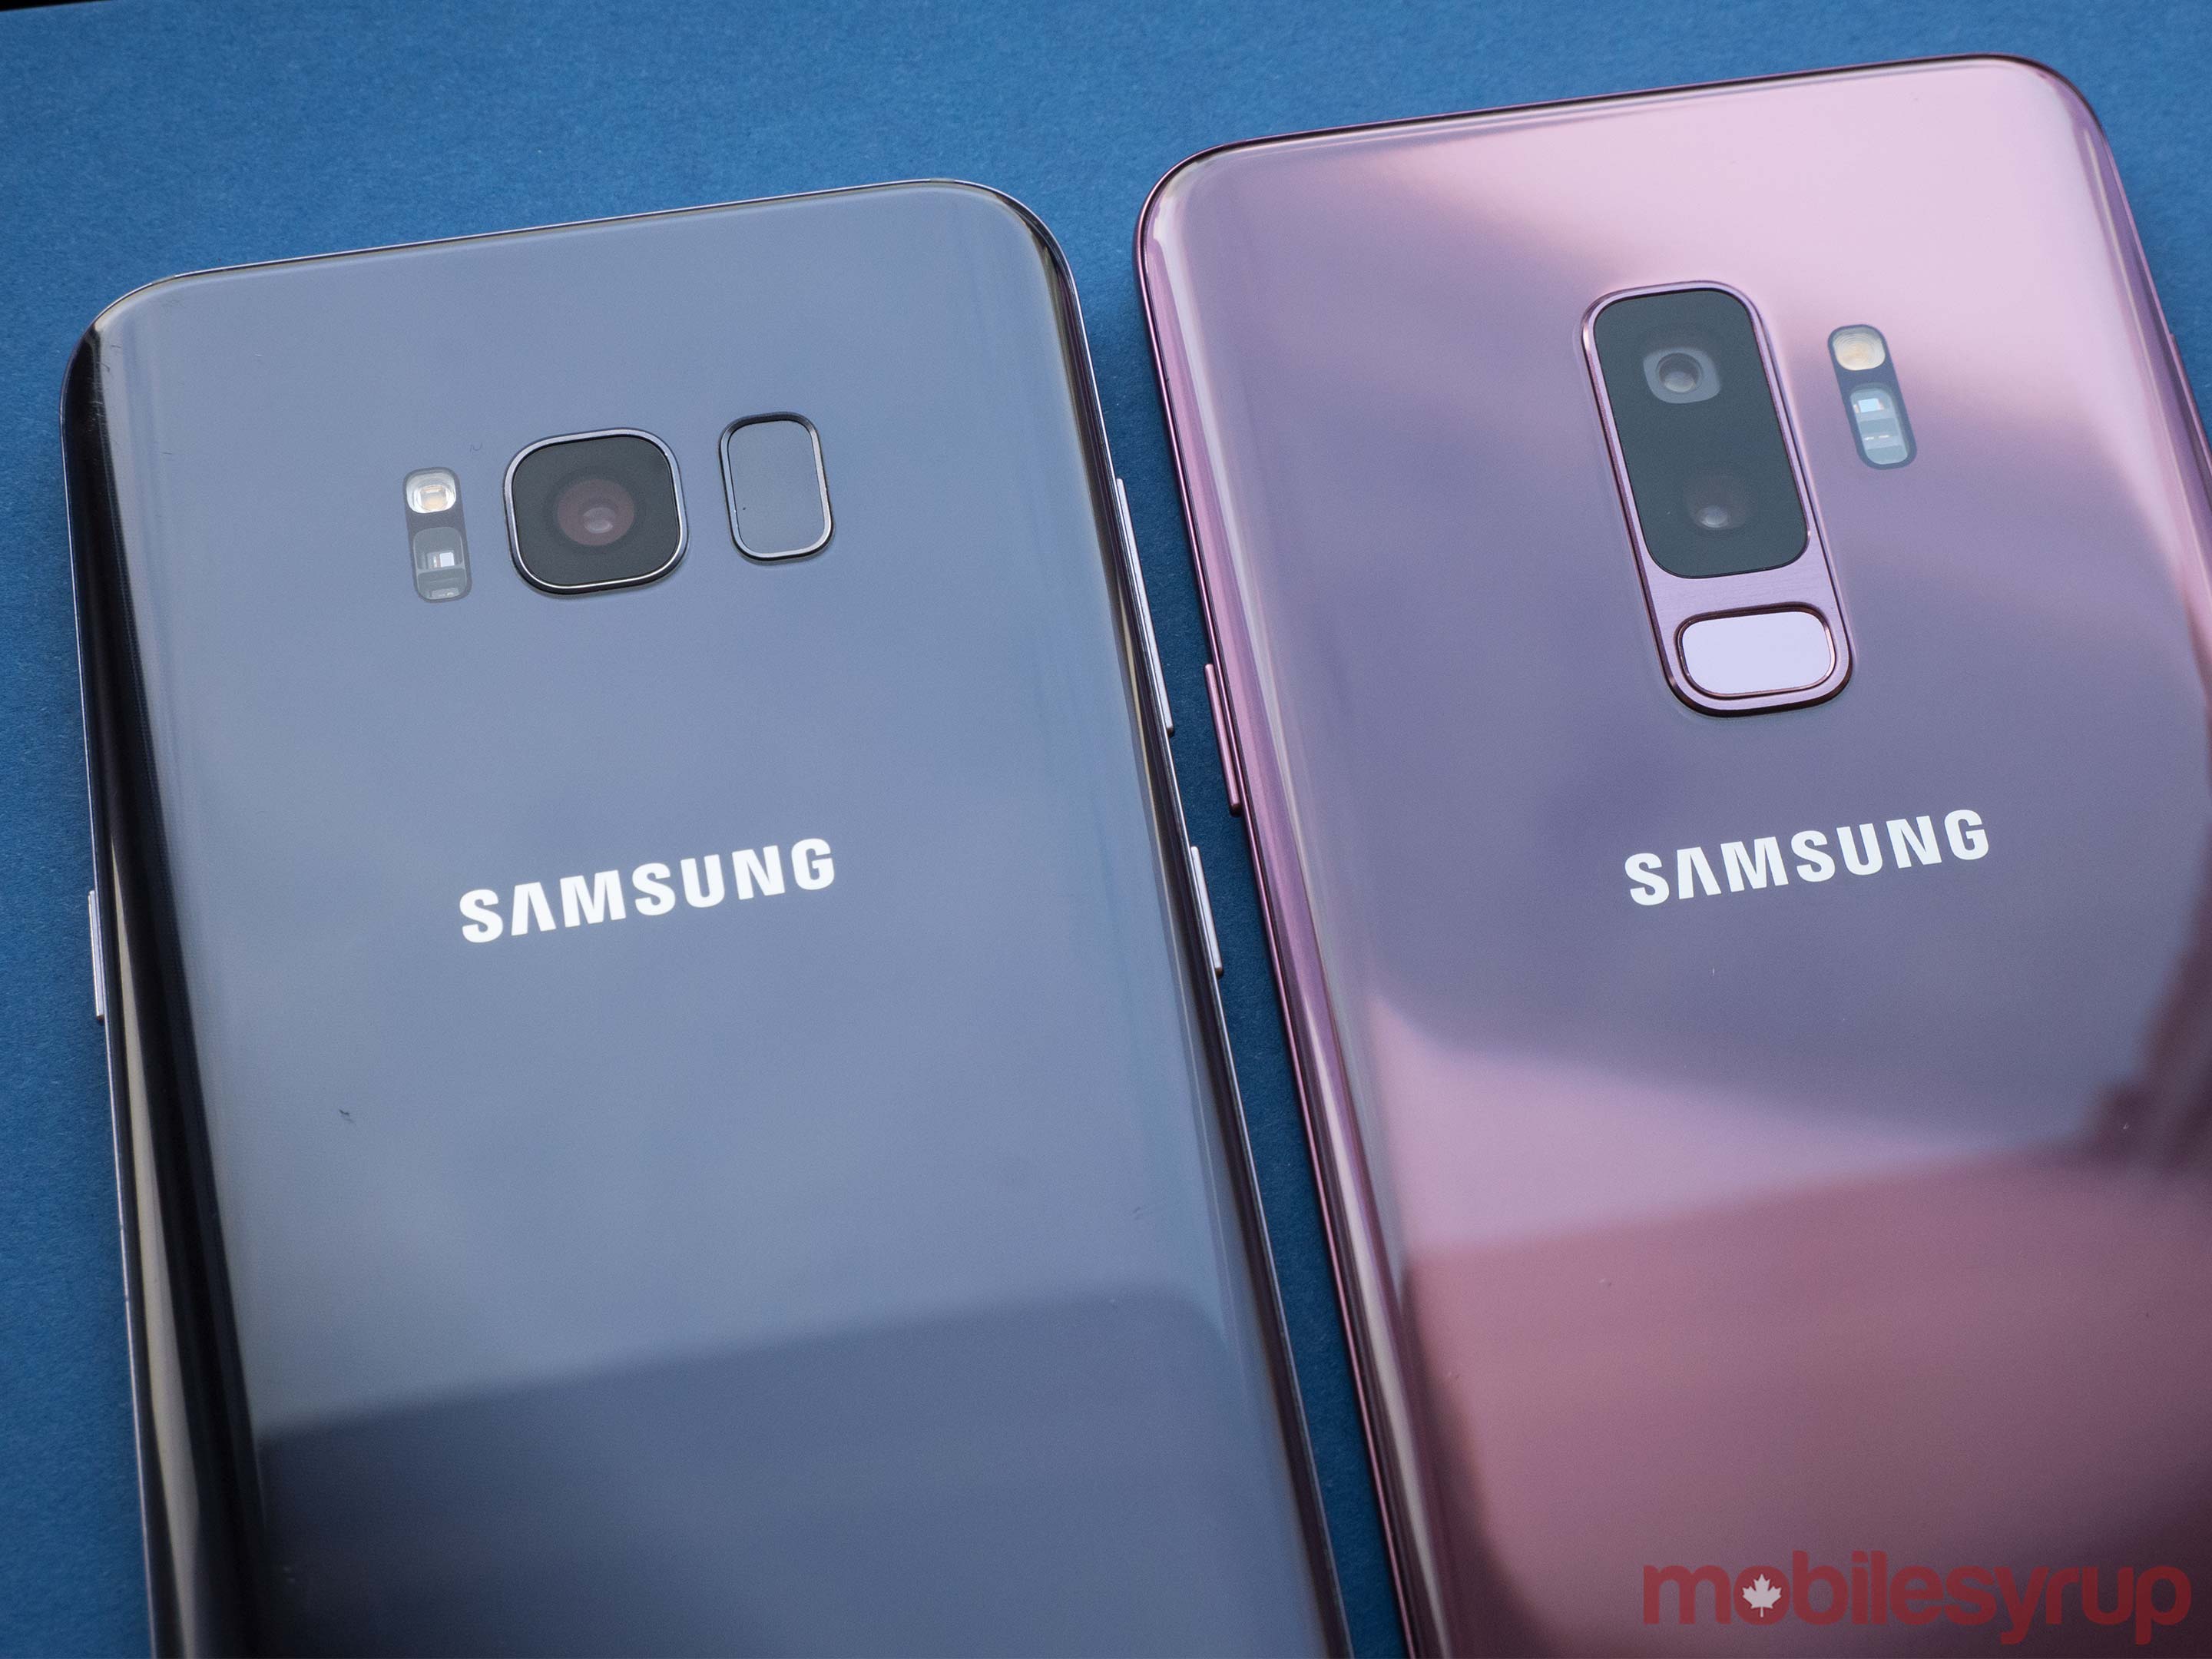 Side-by-side of the S9 and S8